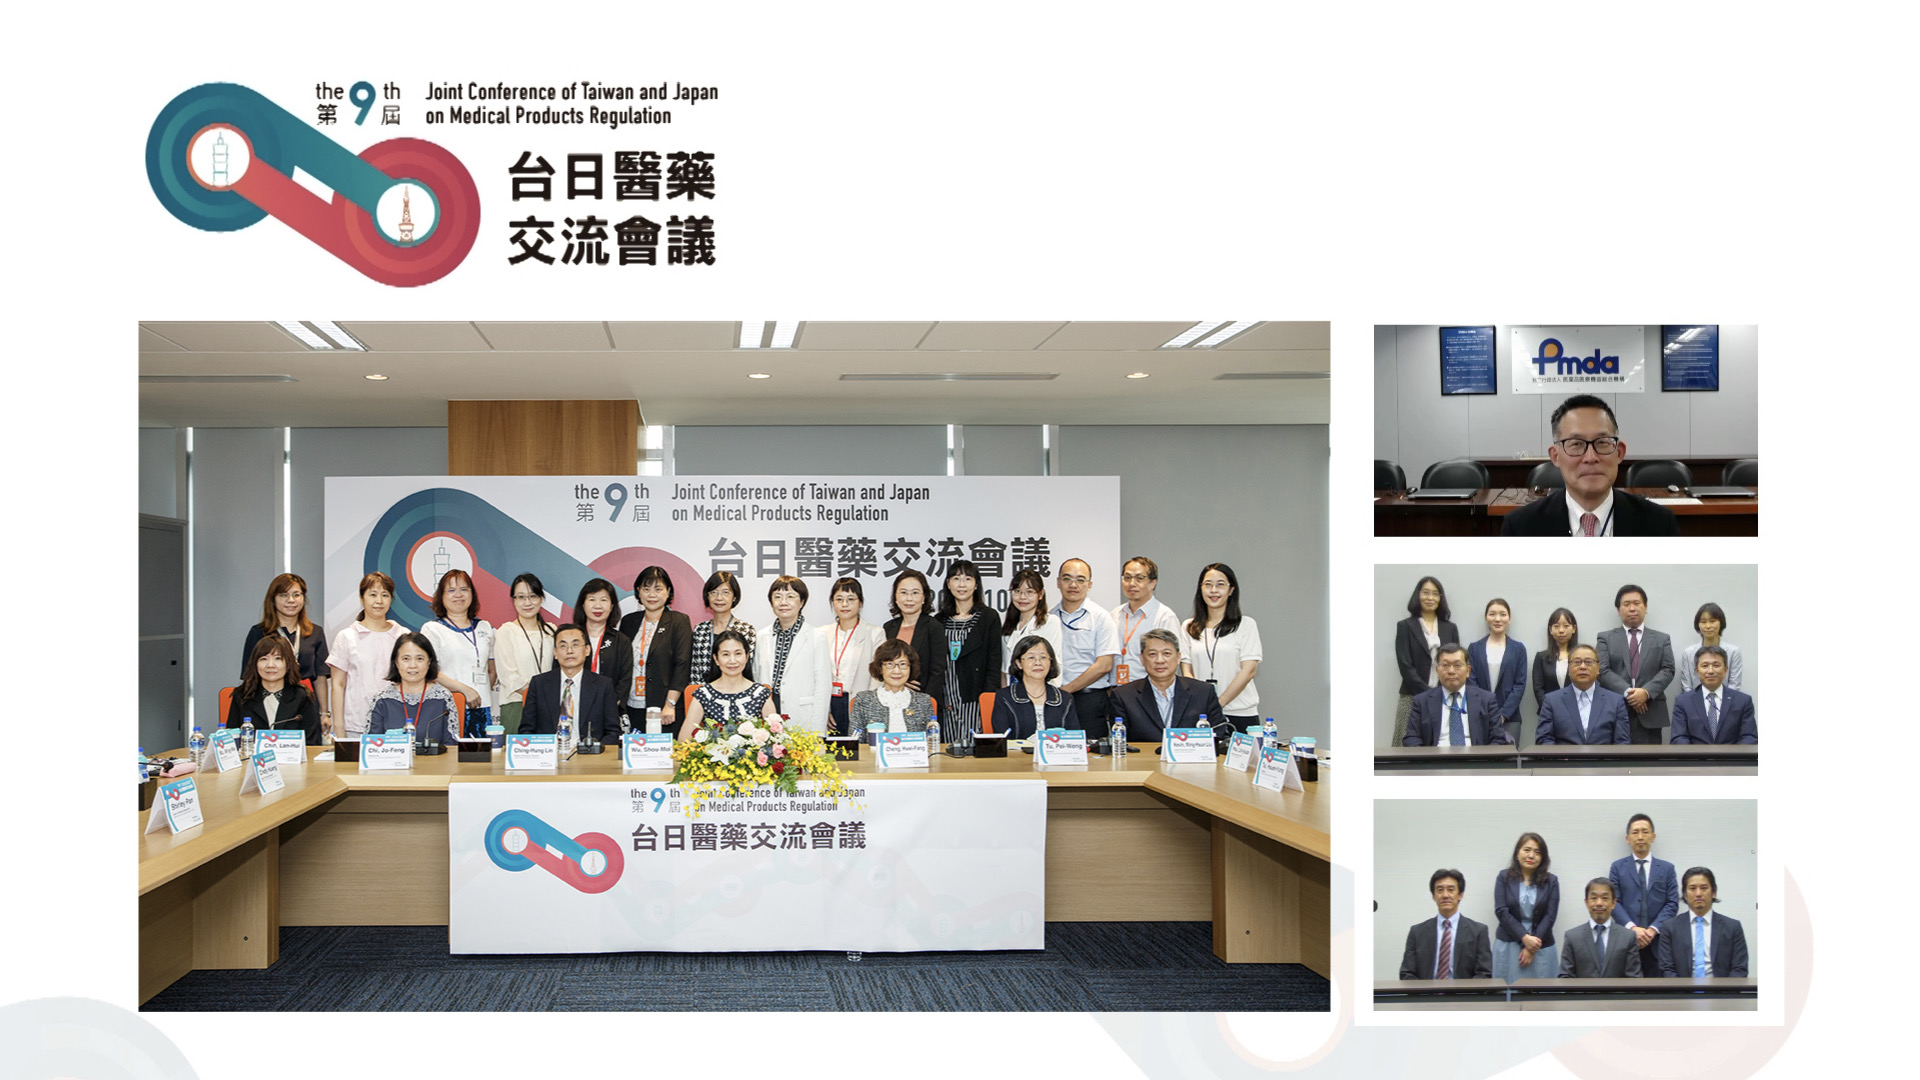 9th Joint Conference of Taiwan and Japan on Medical Products Regulation